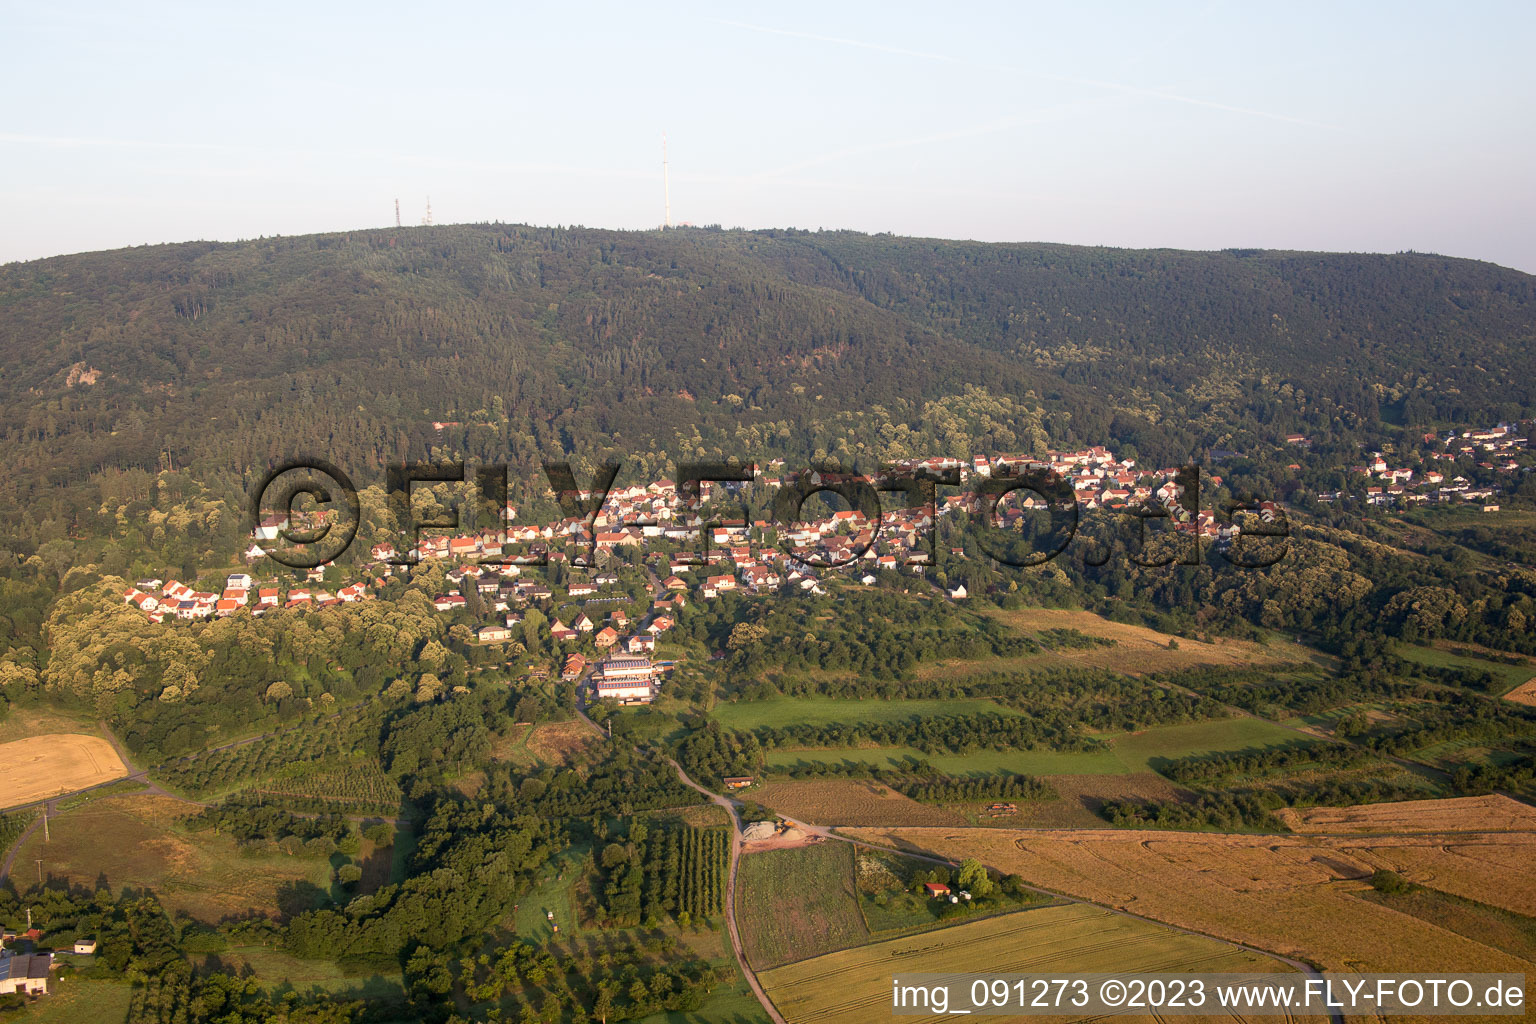 Dannenfels in the state Rhineland-Palatinate, Germany